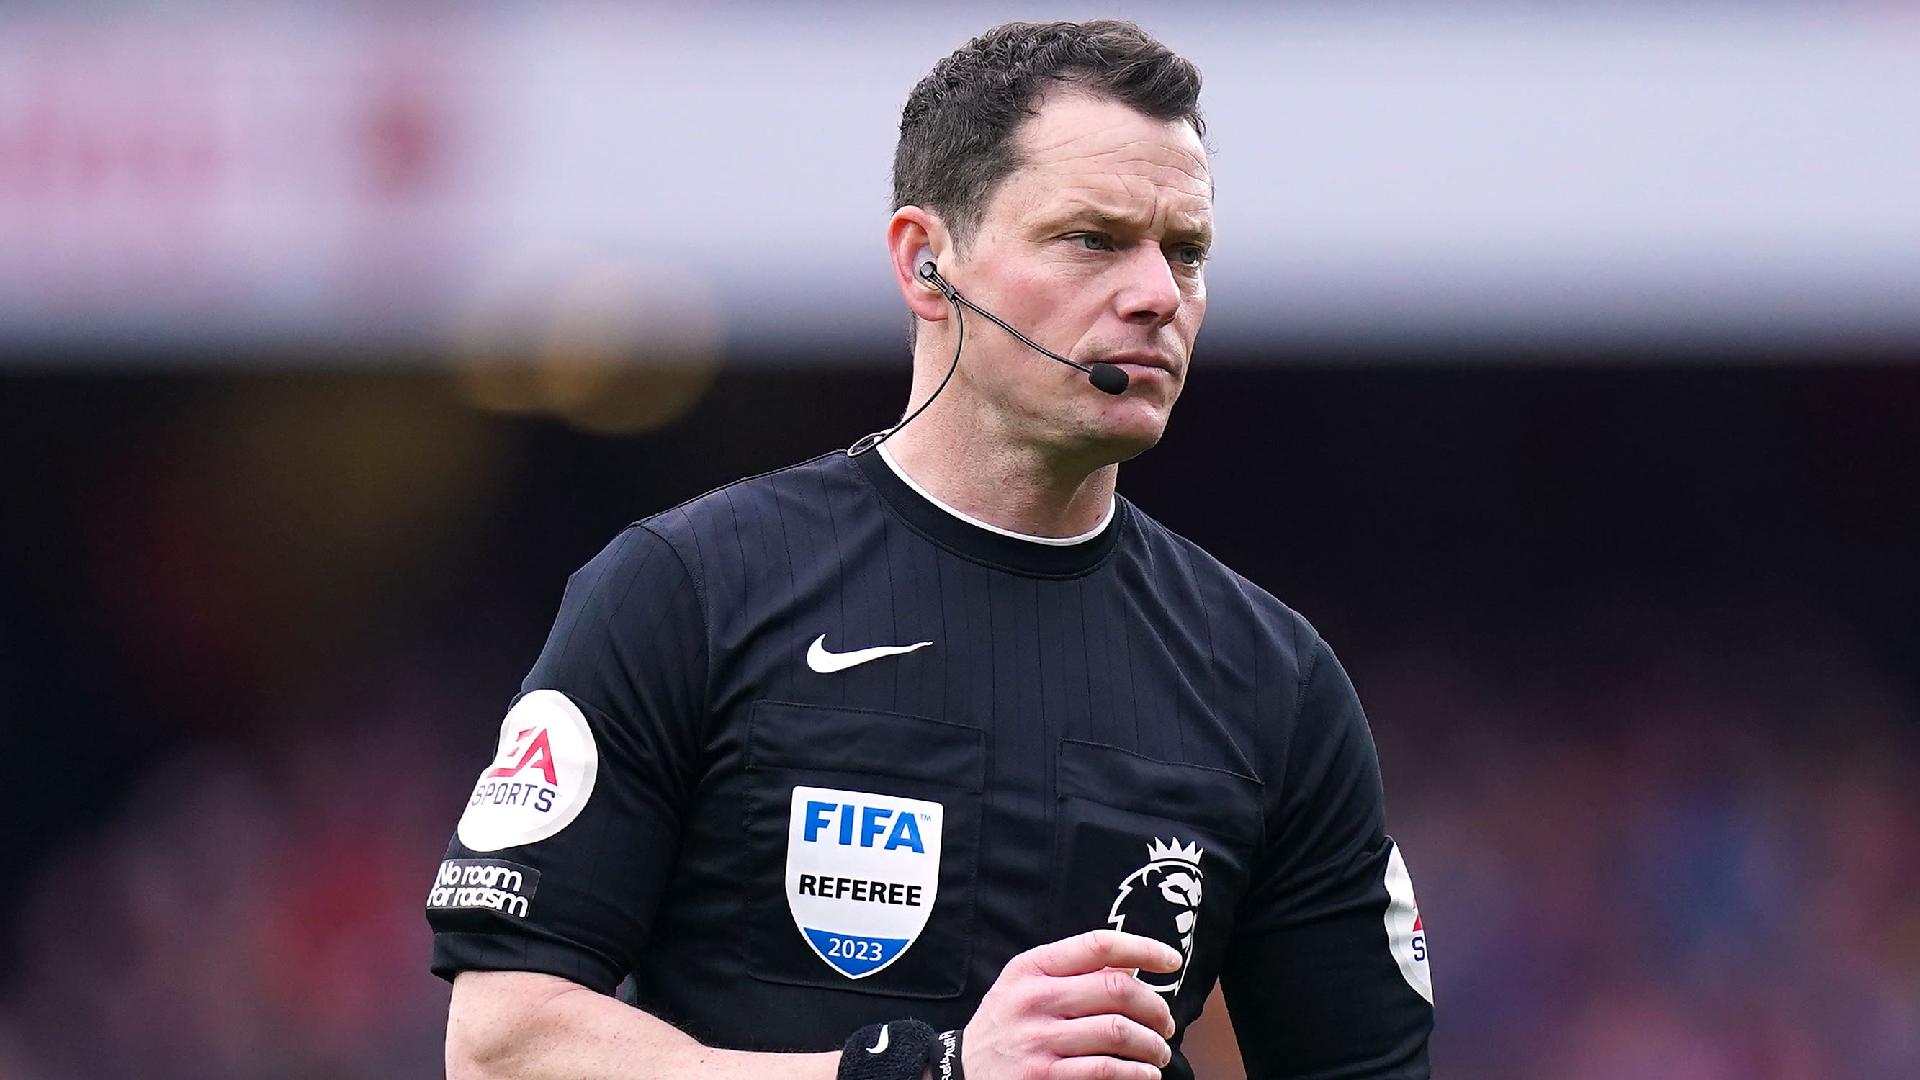 Liverpool criticise PGMOL and will ‘explore options’ after VAR error at Spurs